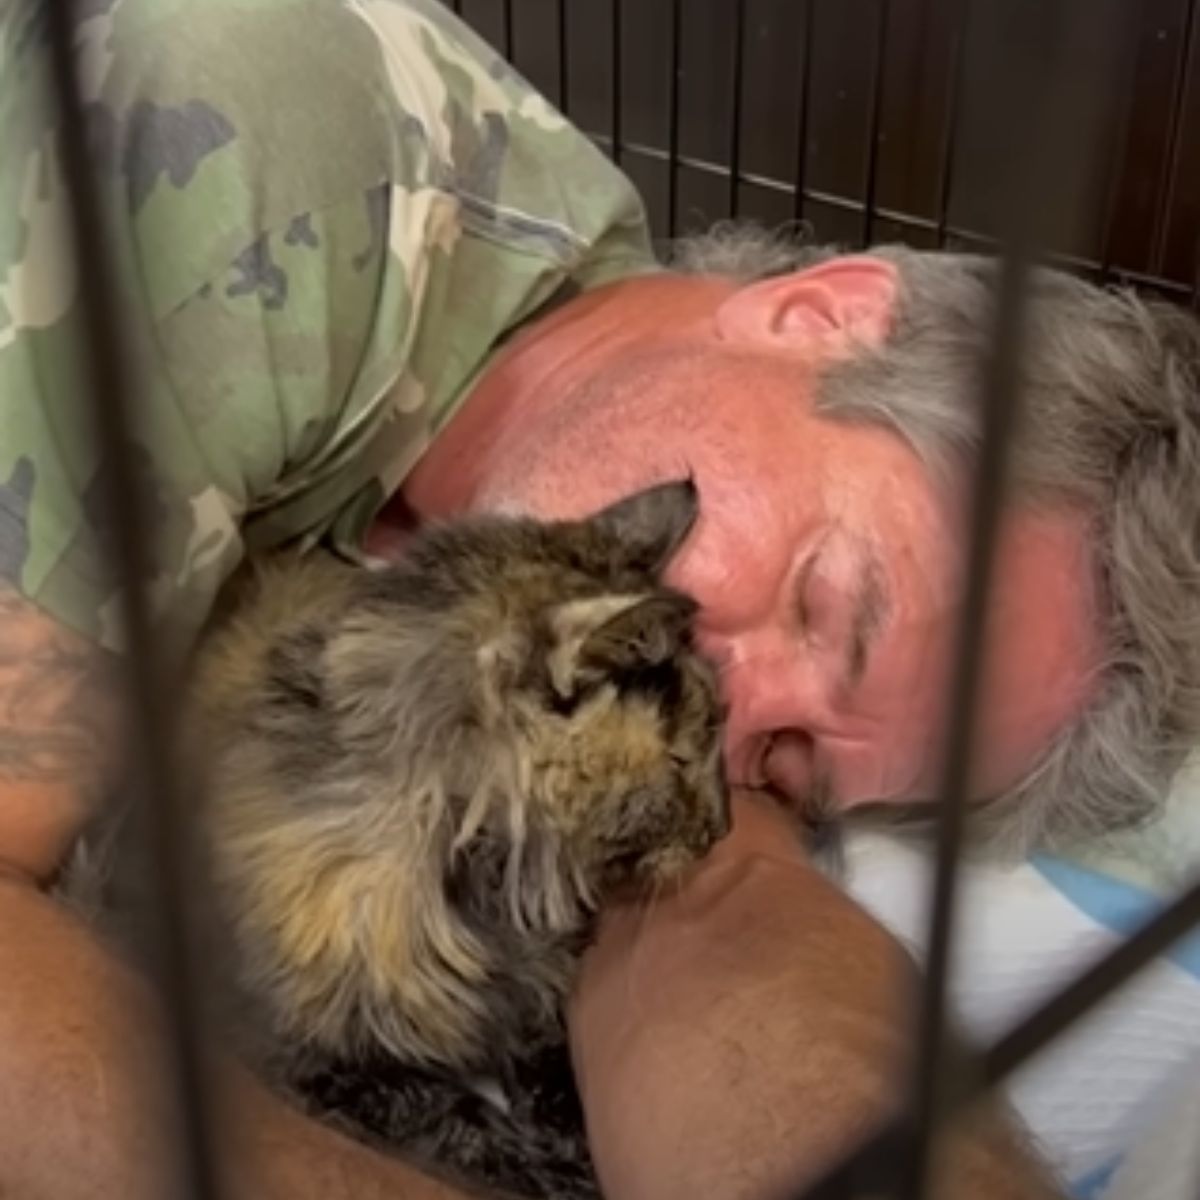 man sleeping with cat in cage